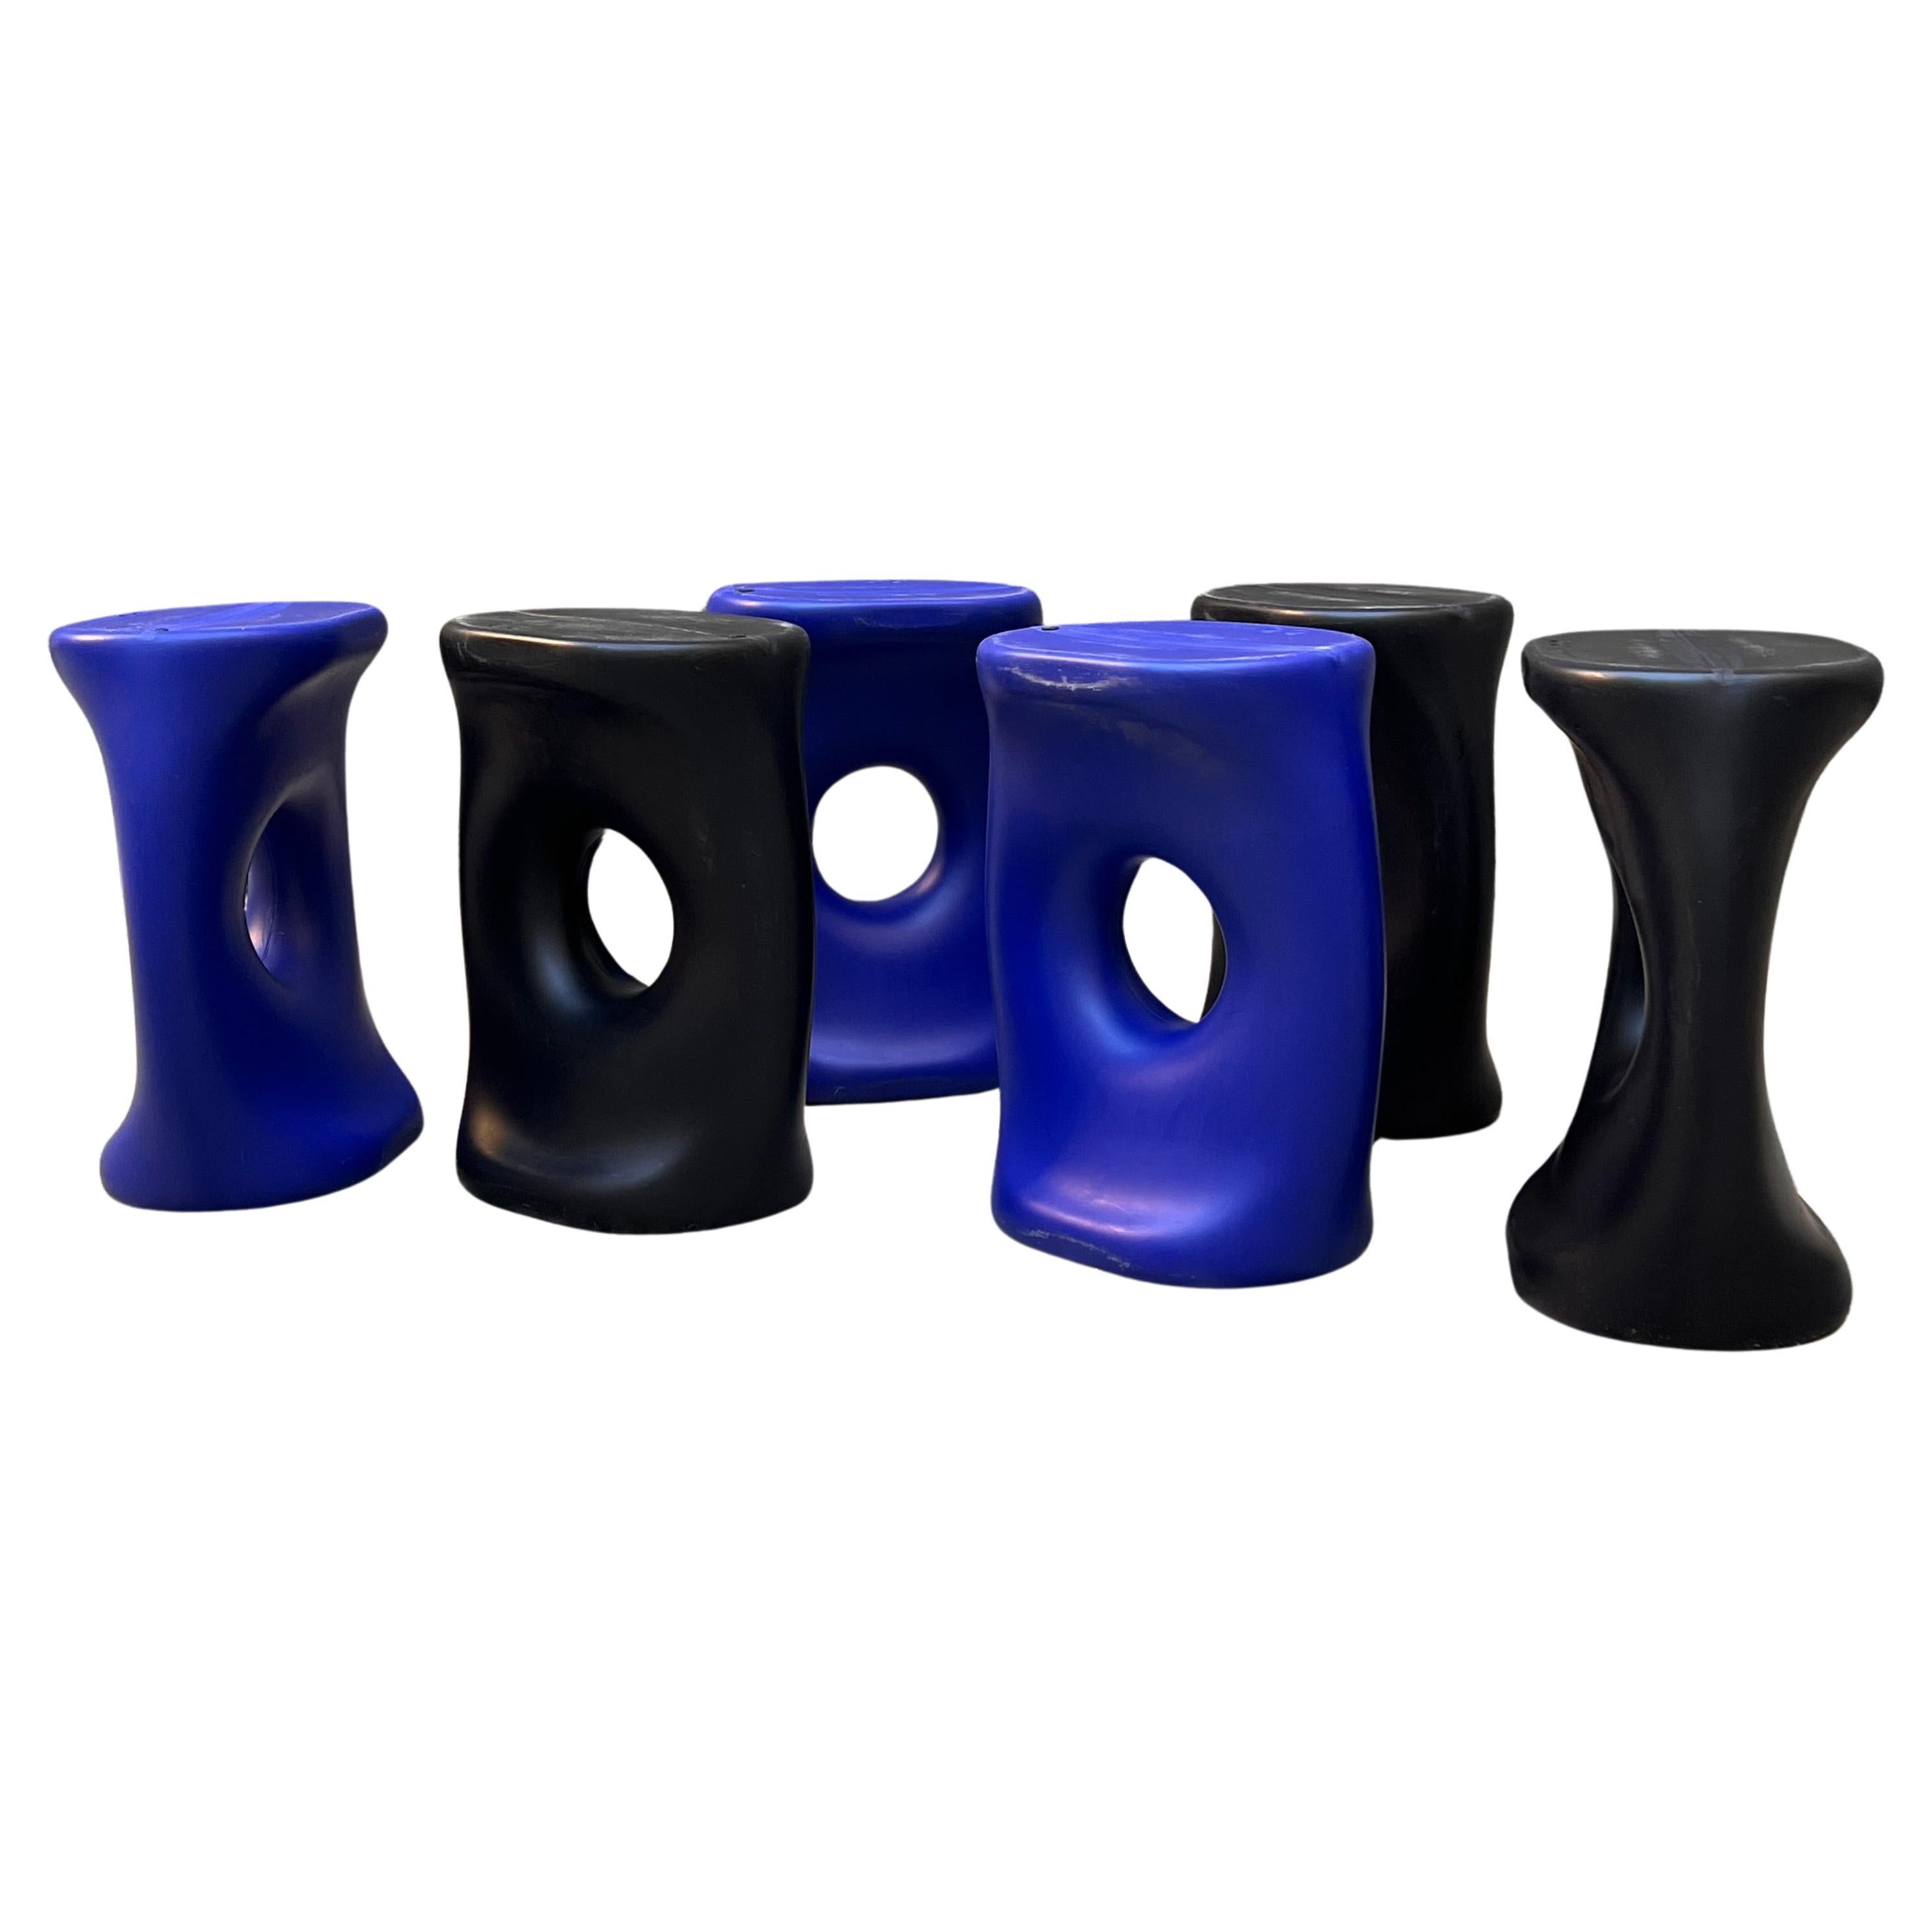 Set of 6 Plastic Stools "HOLO" by Y. Tsurumaru for Hidden - 1990s For Sale